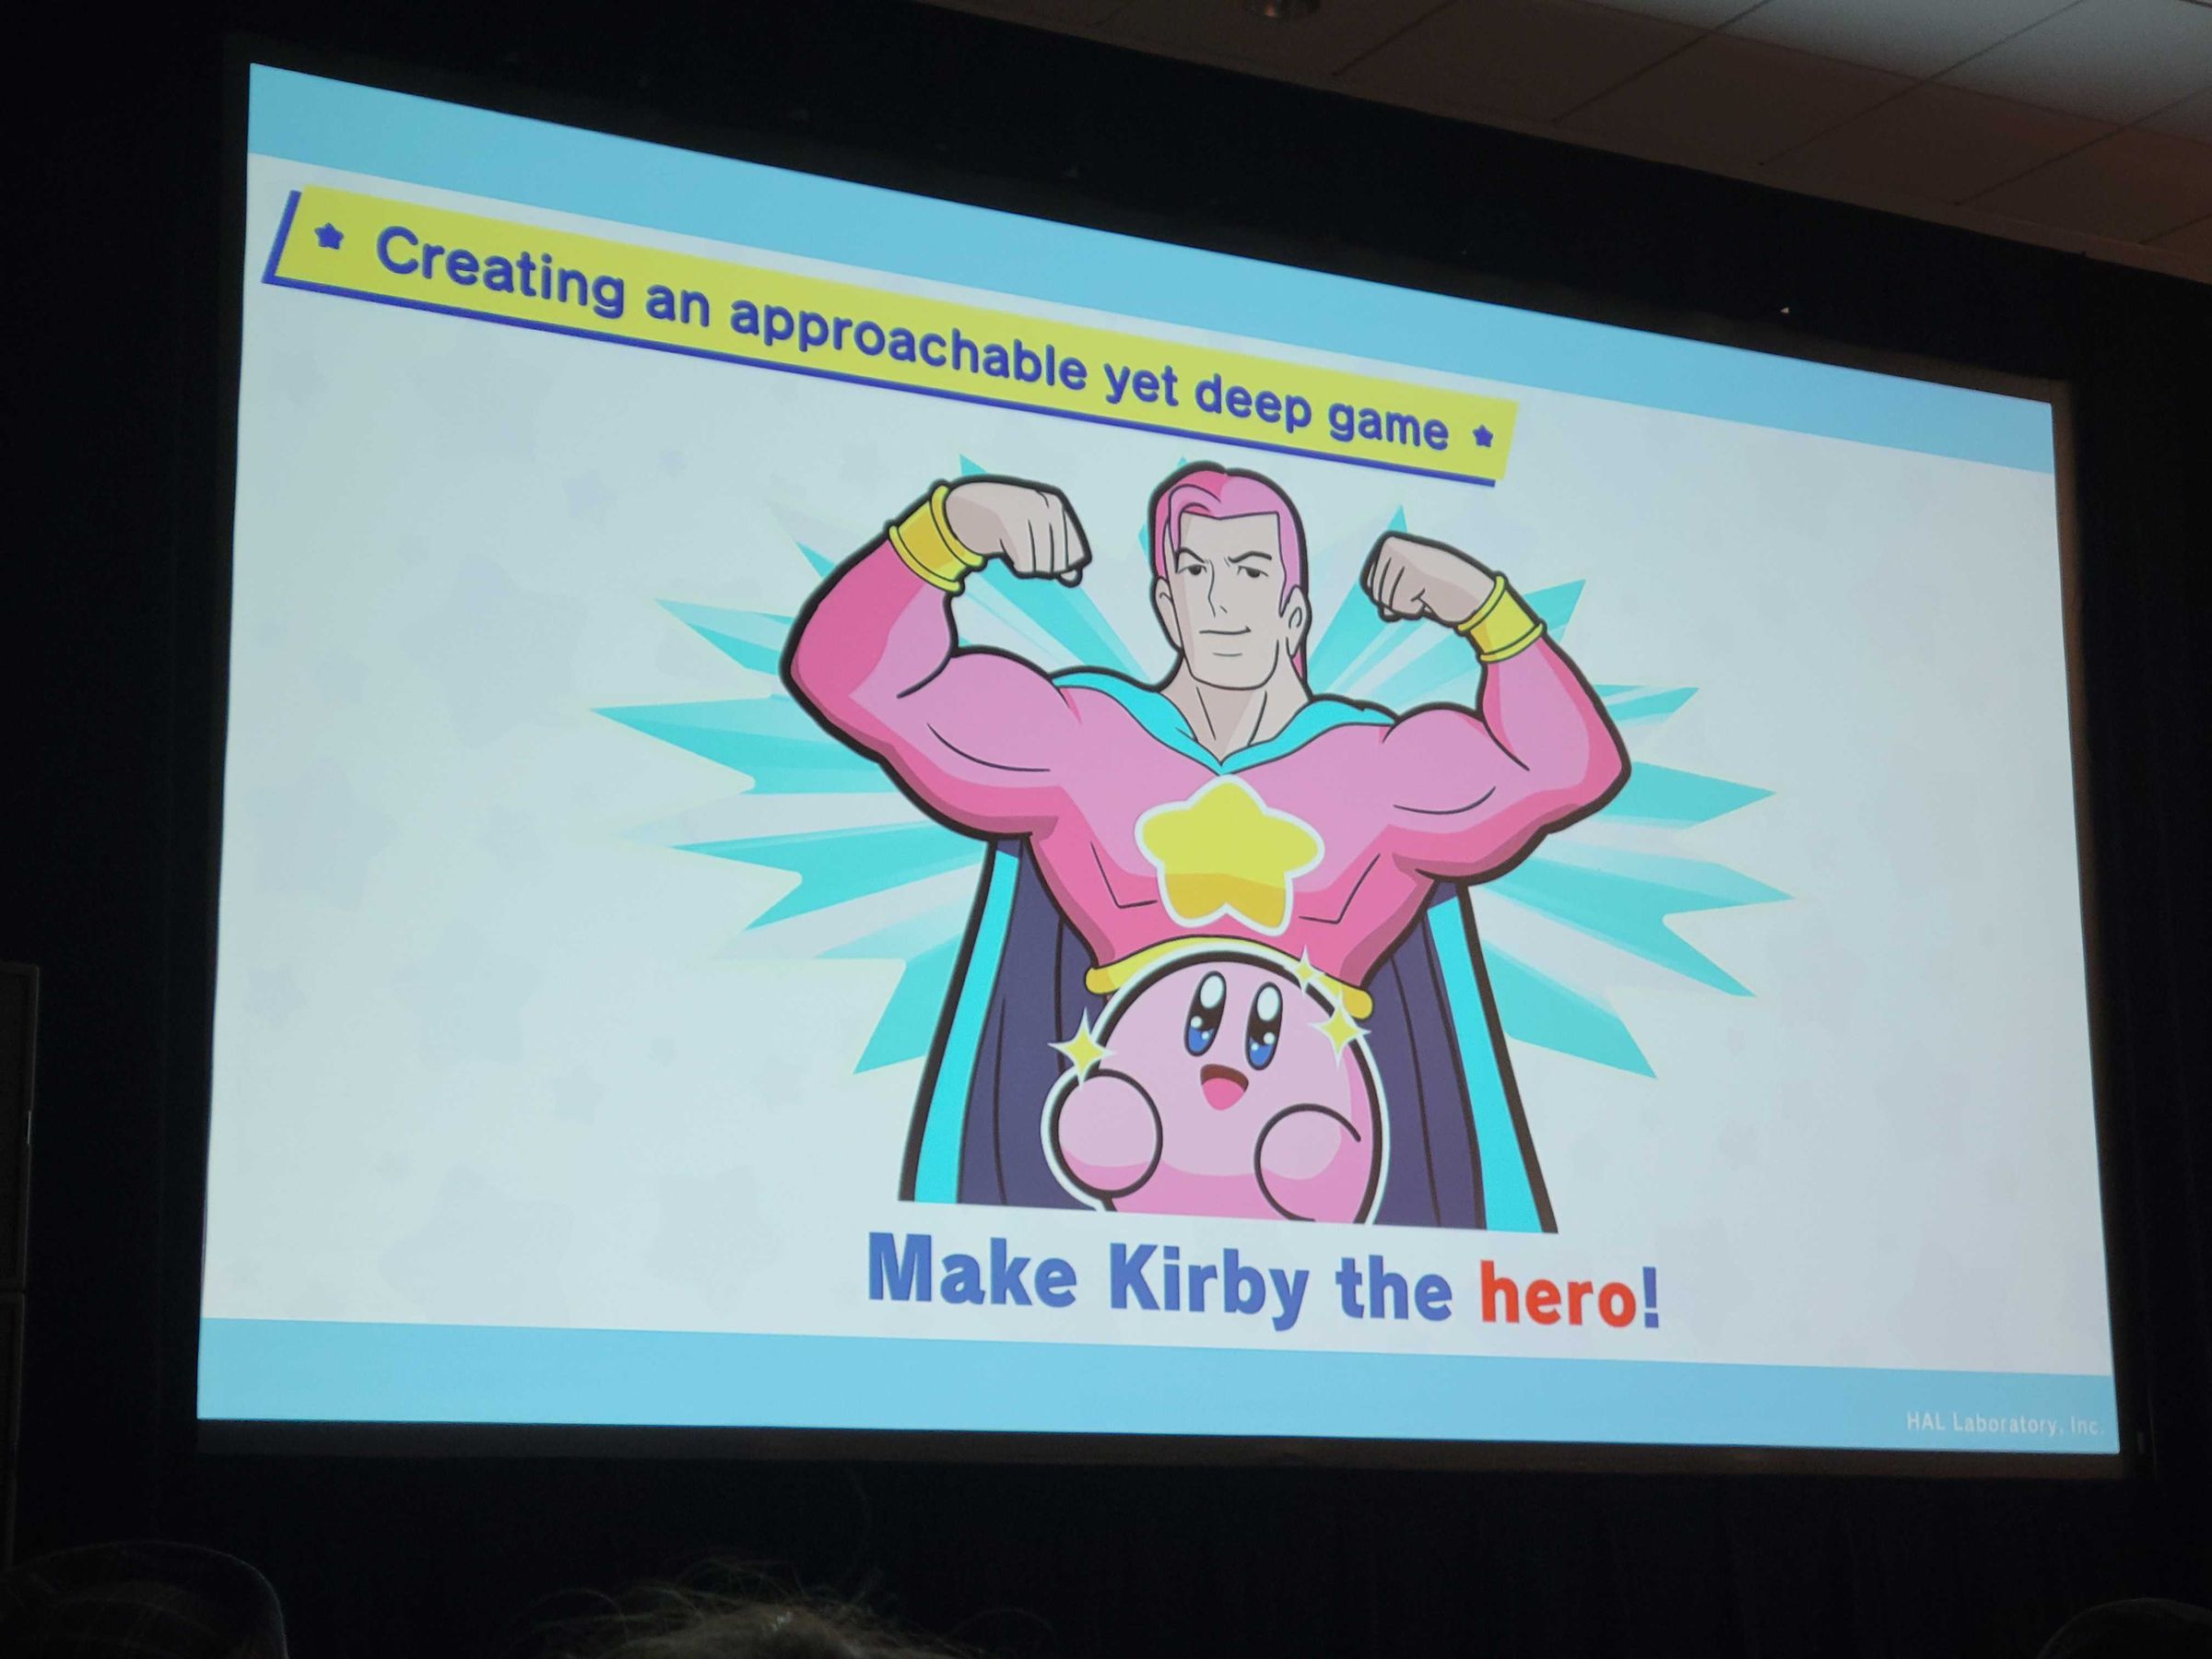 Photo taken from “The Many Dimensions of Kirby” presentation at GDC 2023 featuring Kirby standing in front of a buff cartoon man wearing a superhero costume